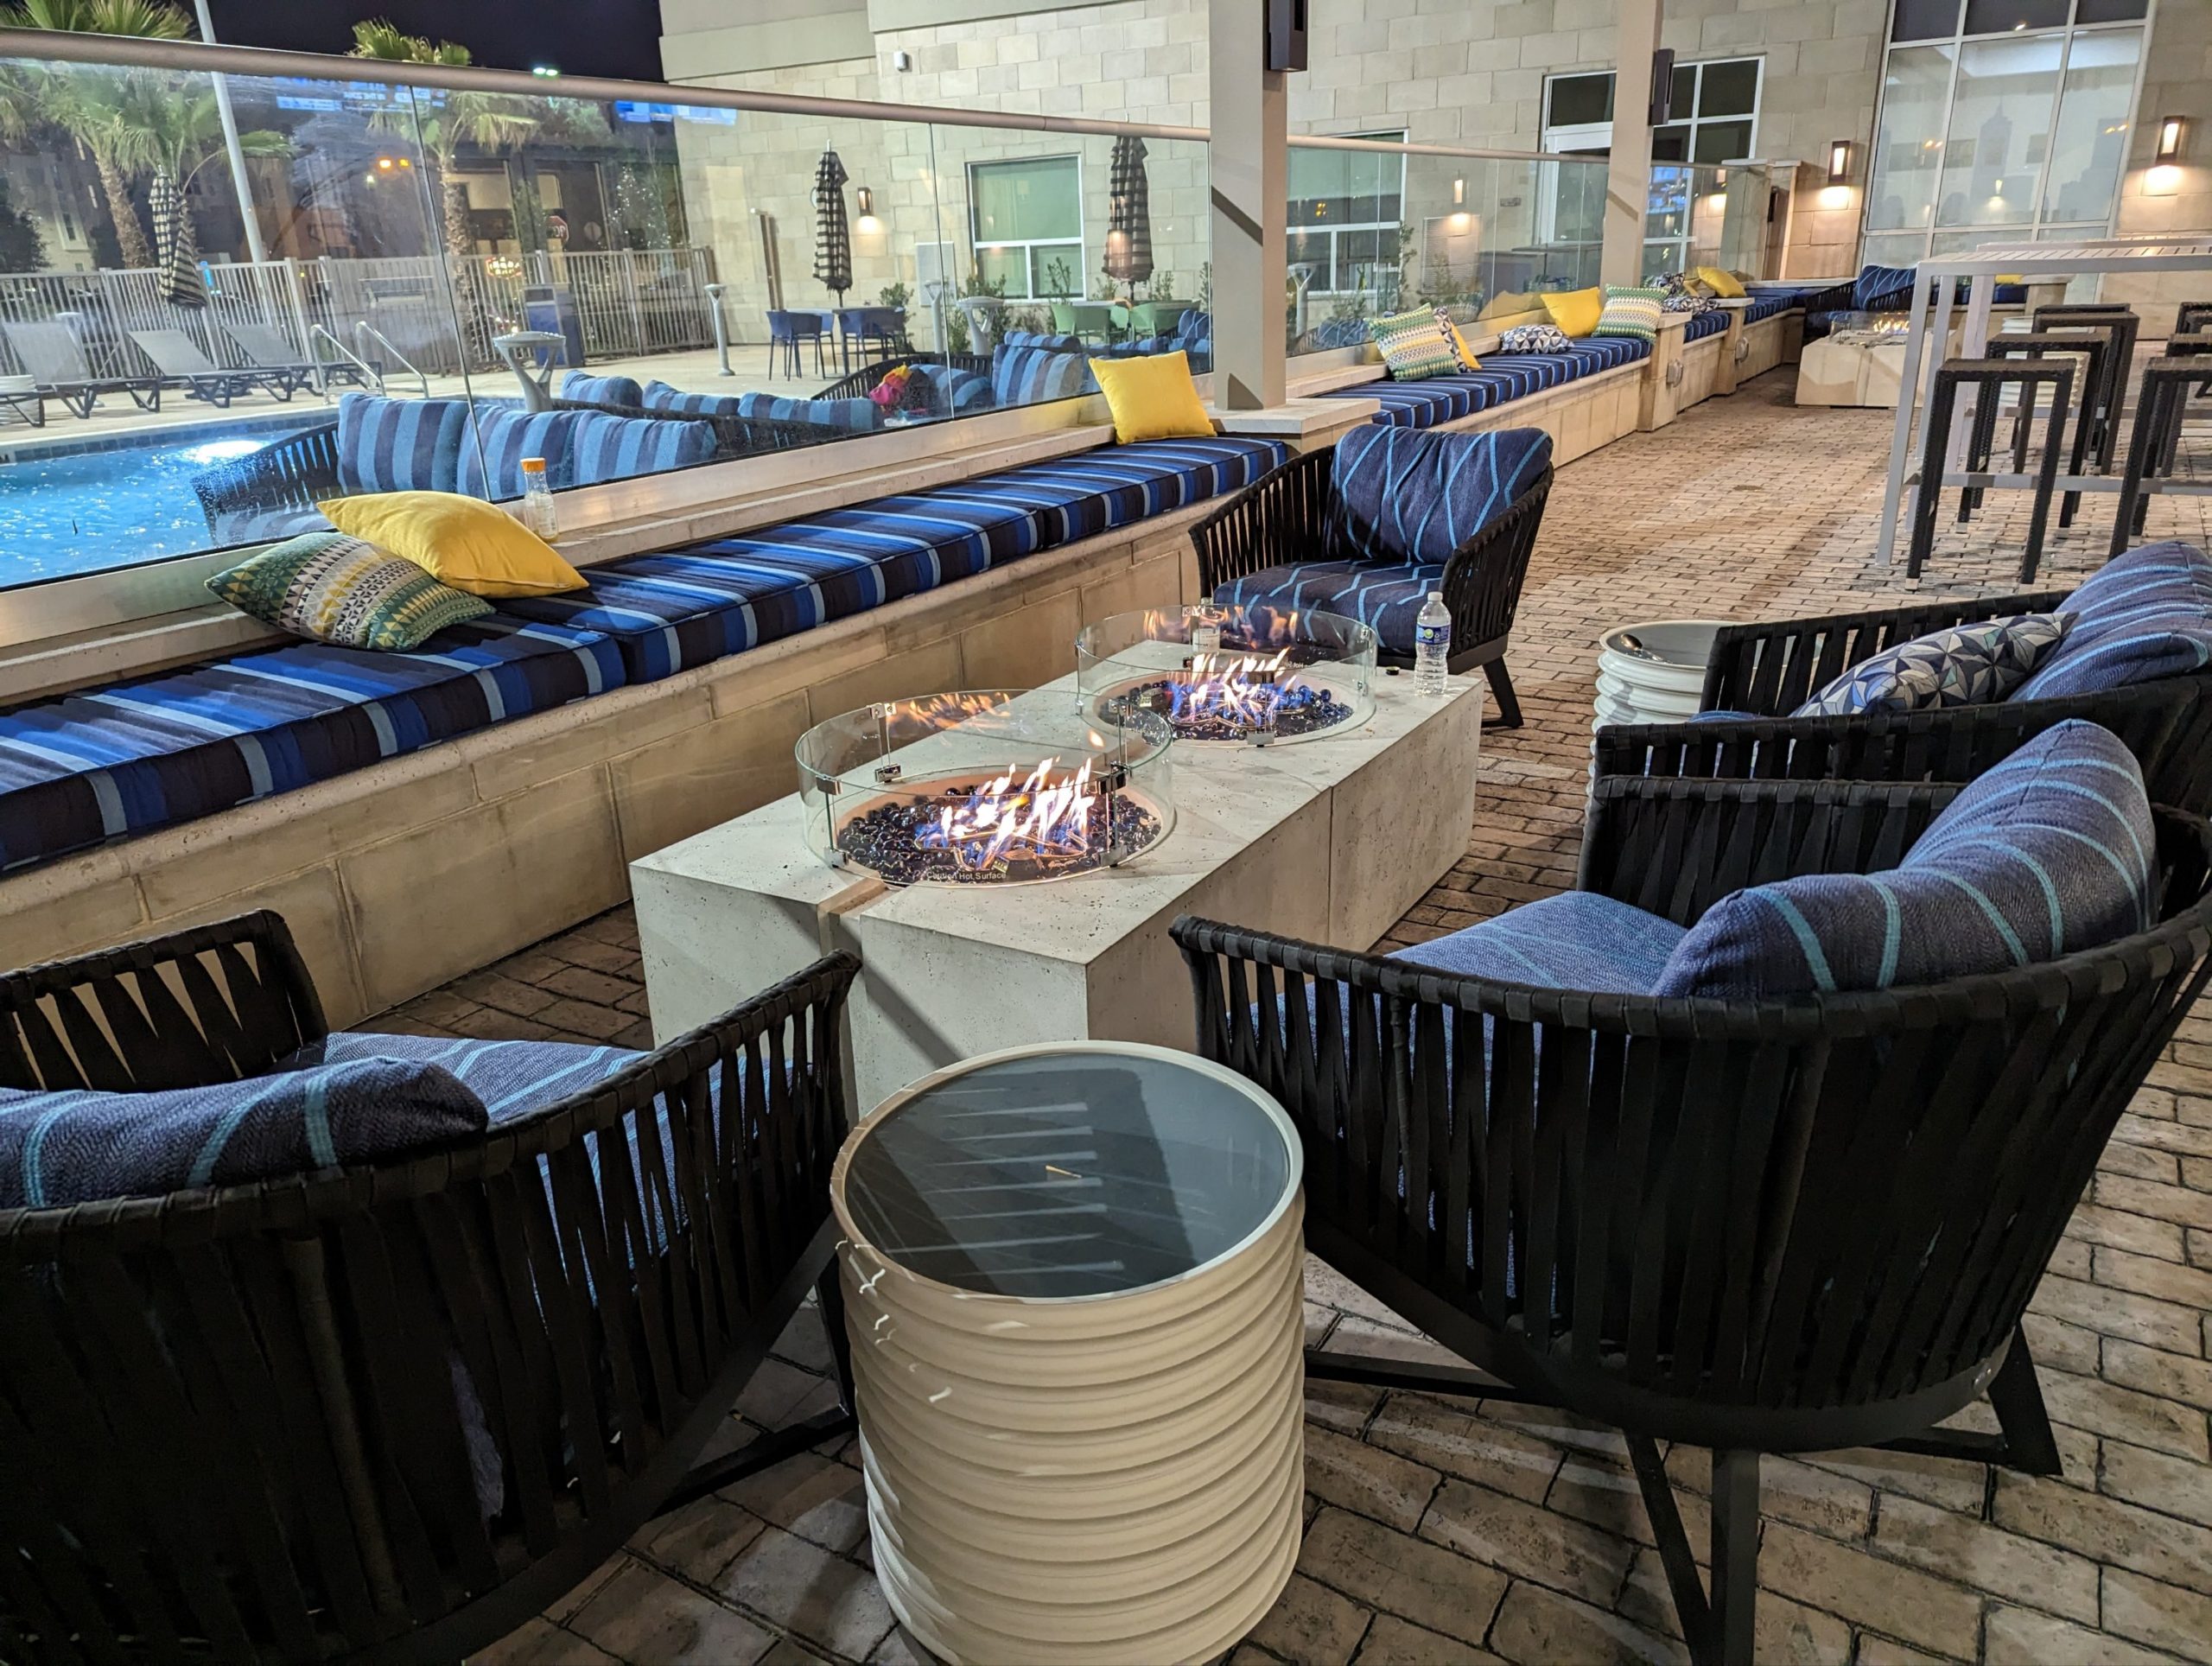 a fire pit with chairs and pillows on a patio